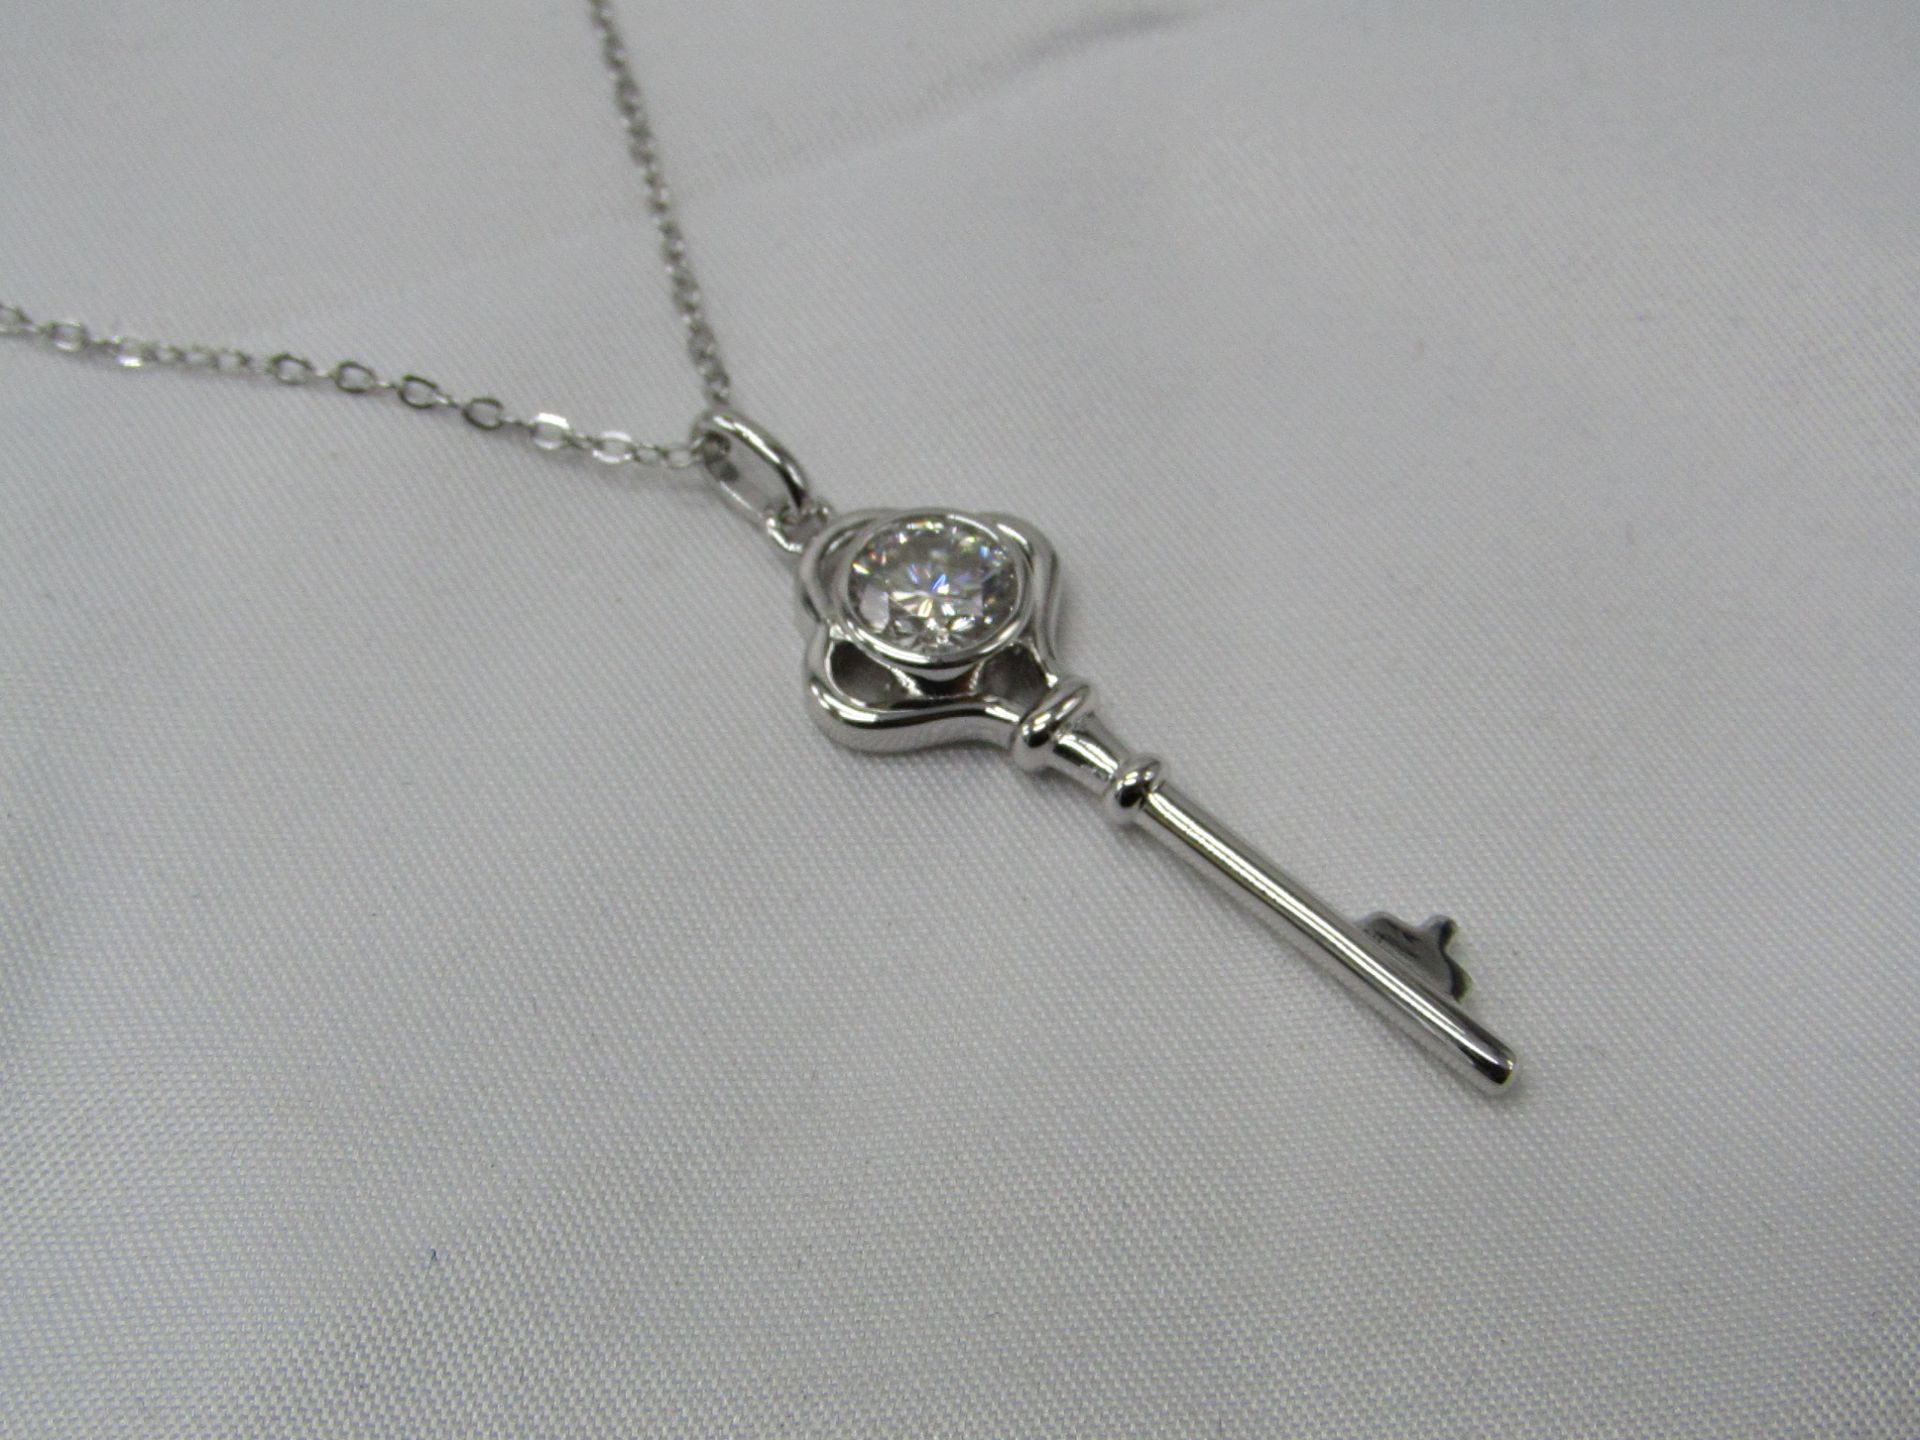 1 Carat Round Brilliant Cut Moissanite stone in a 925 Silver setting and Necklace, new and comes